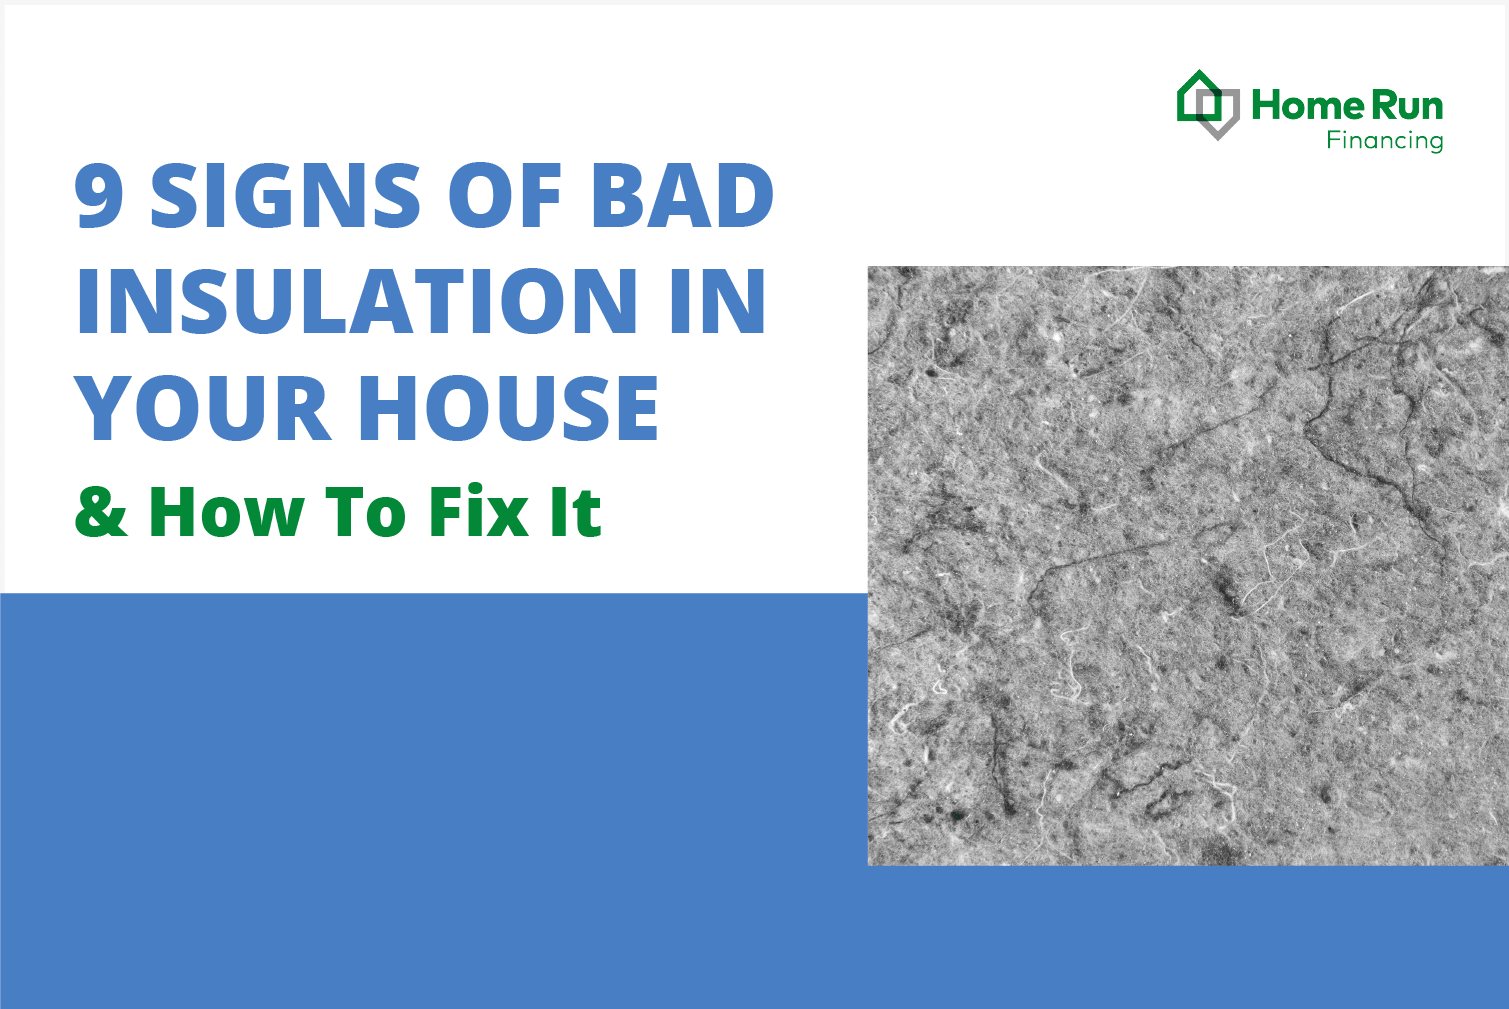 9 signs of bad insulation in your house & how to fix it